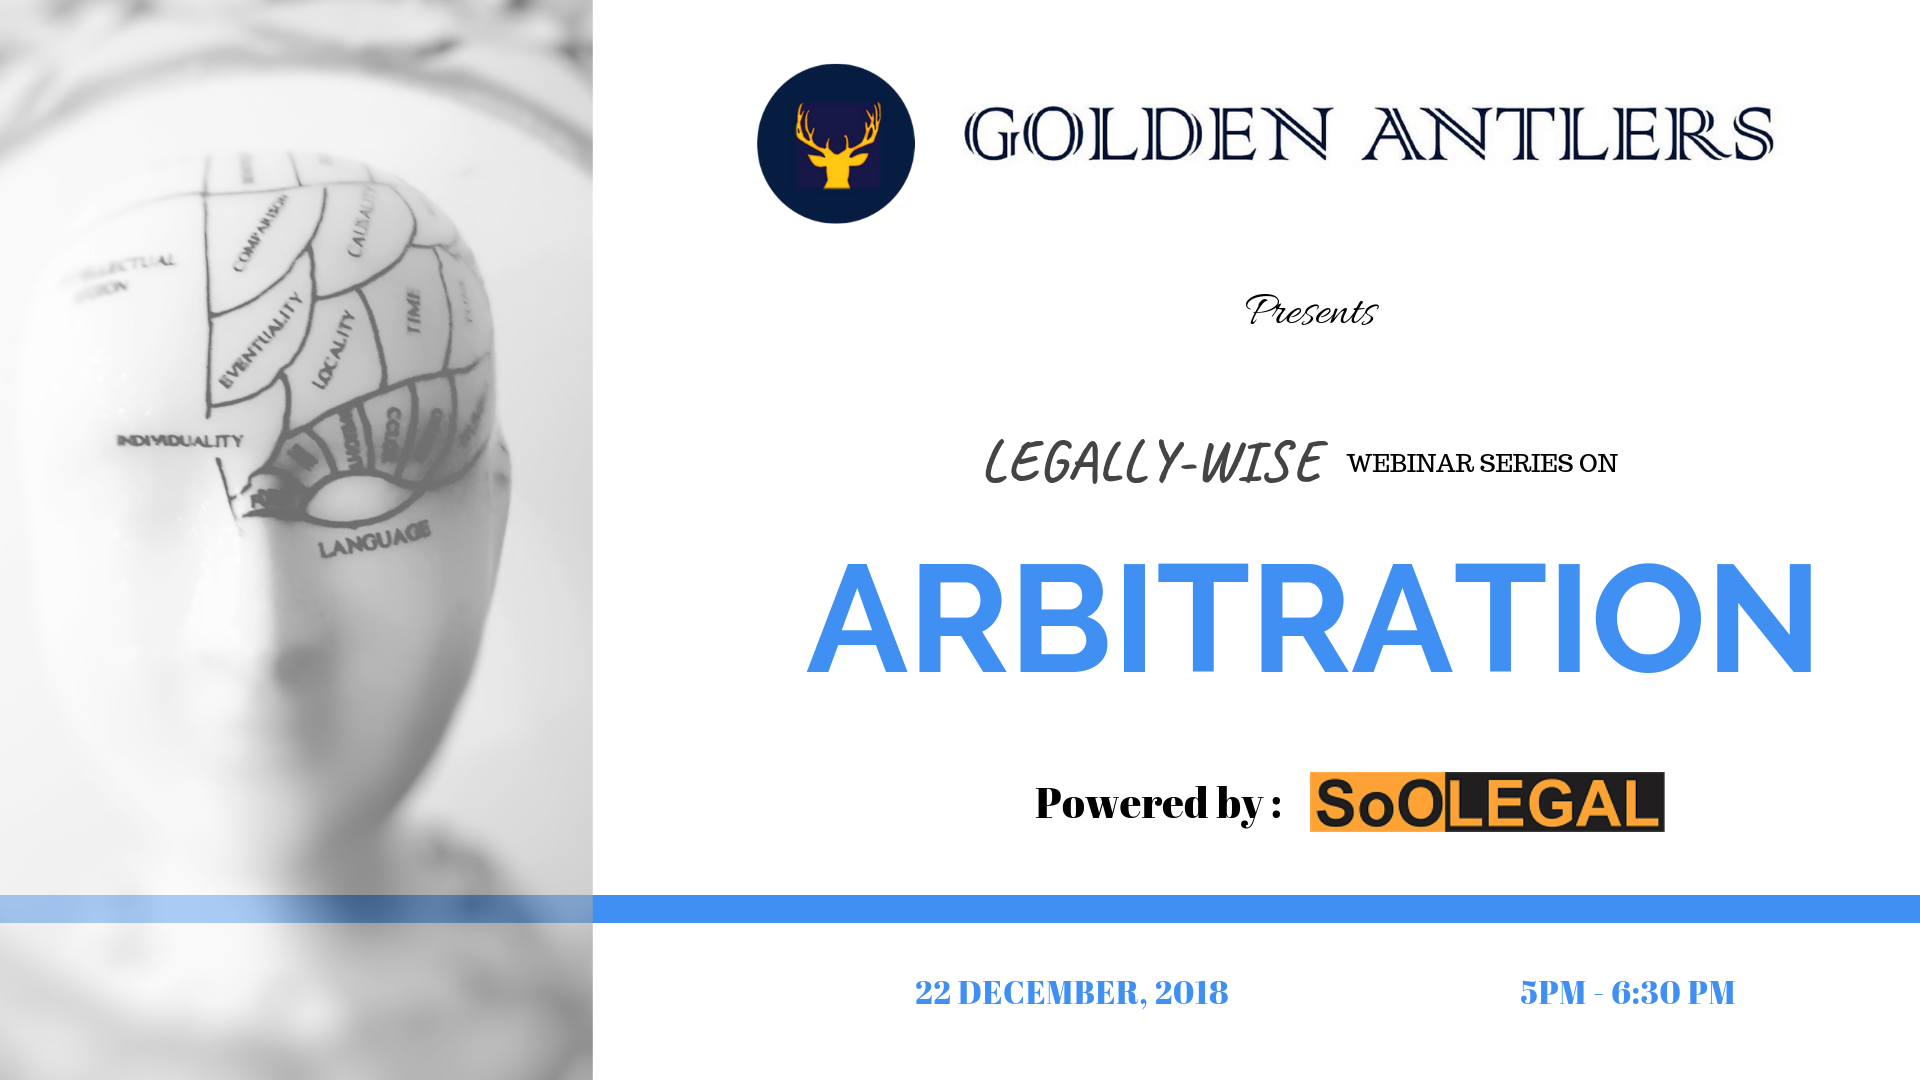 Legally wise webinar series on Arbitration